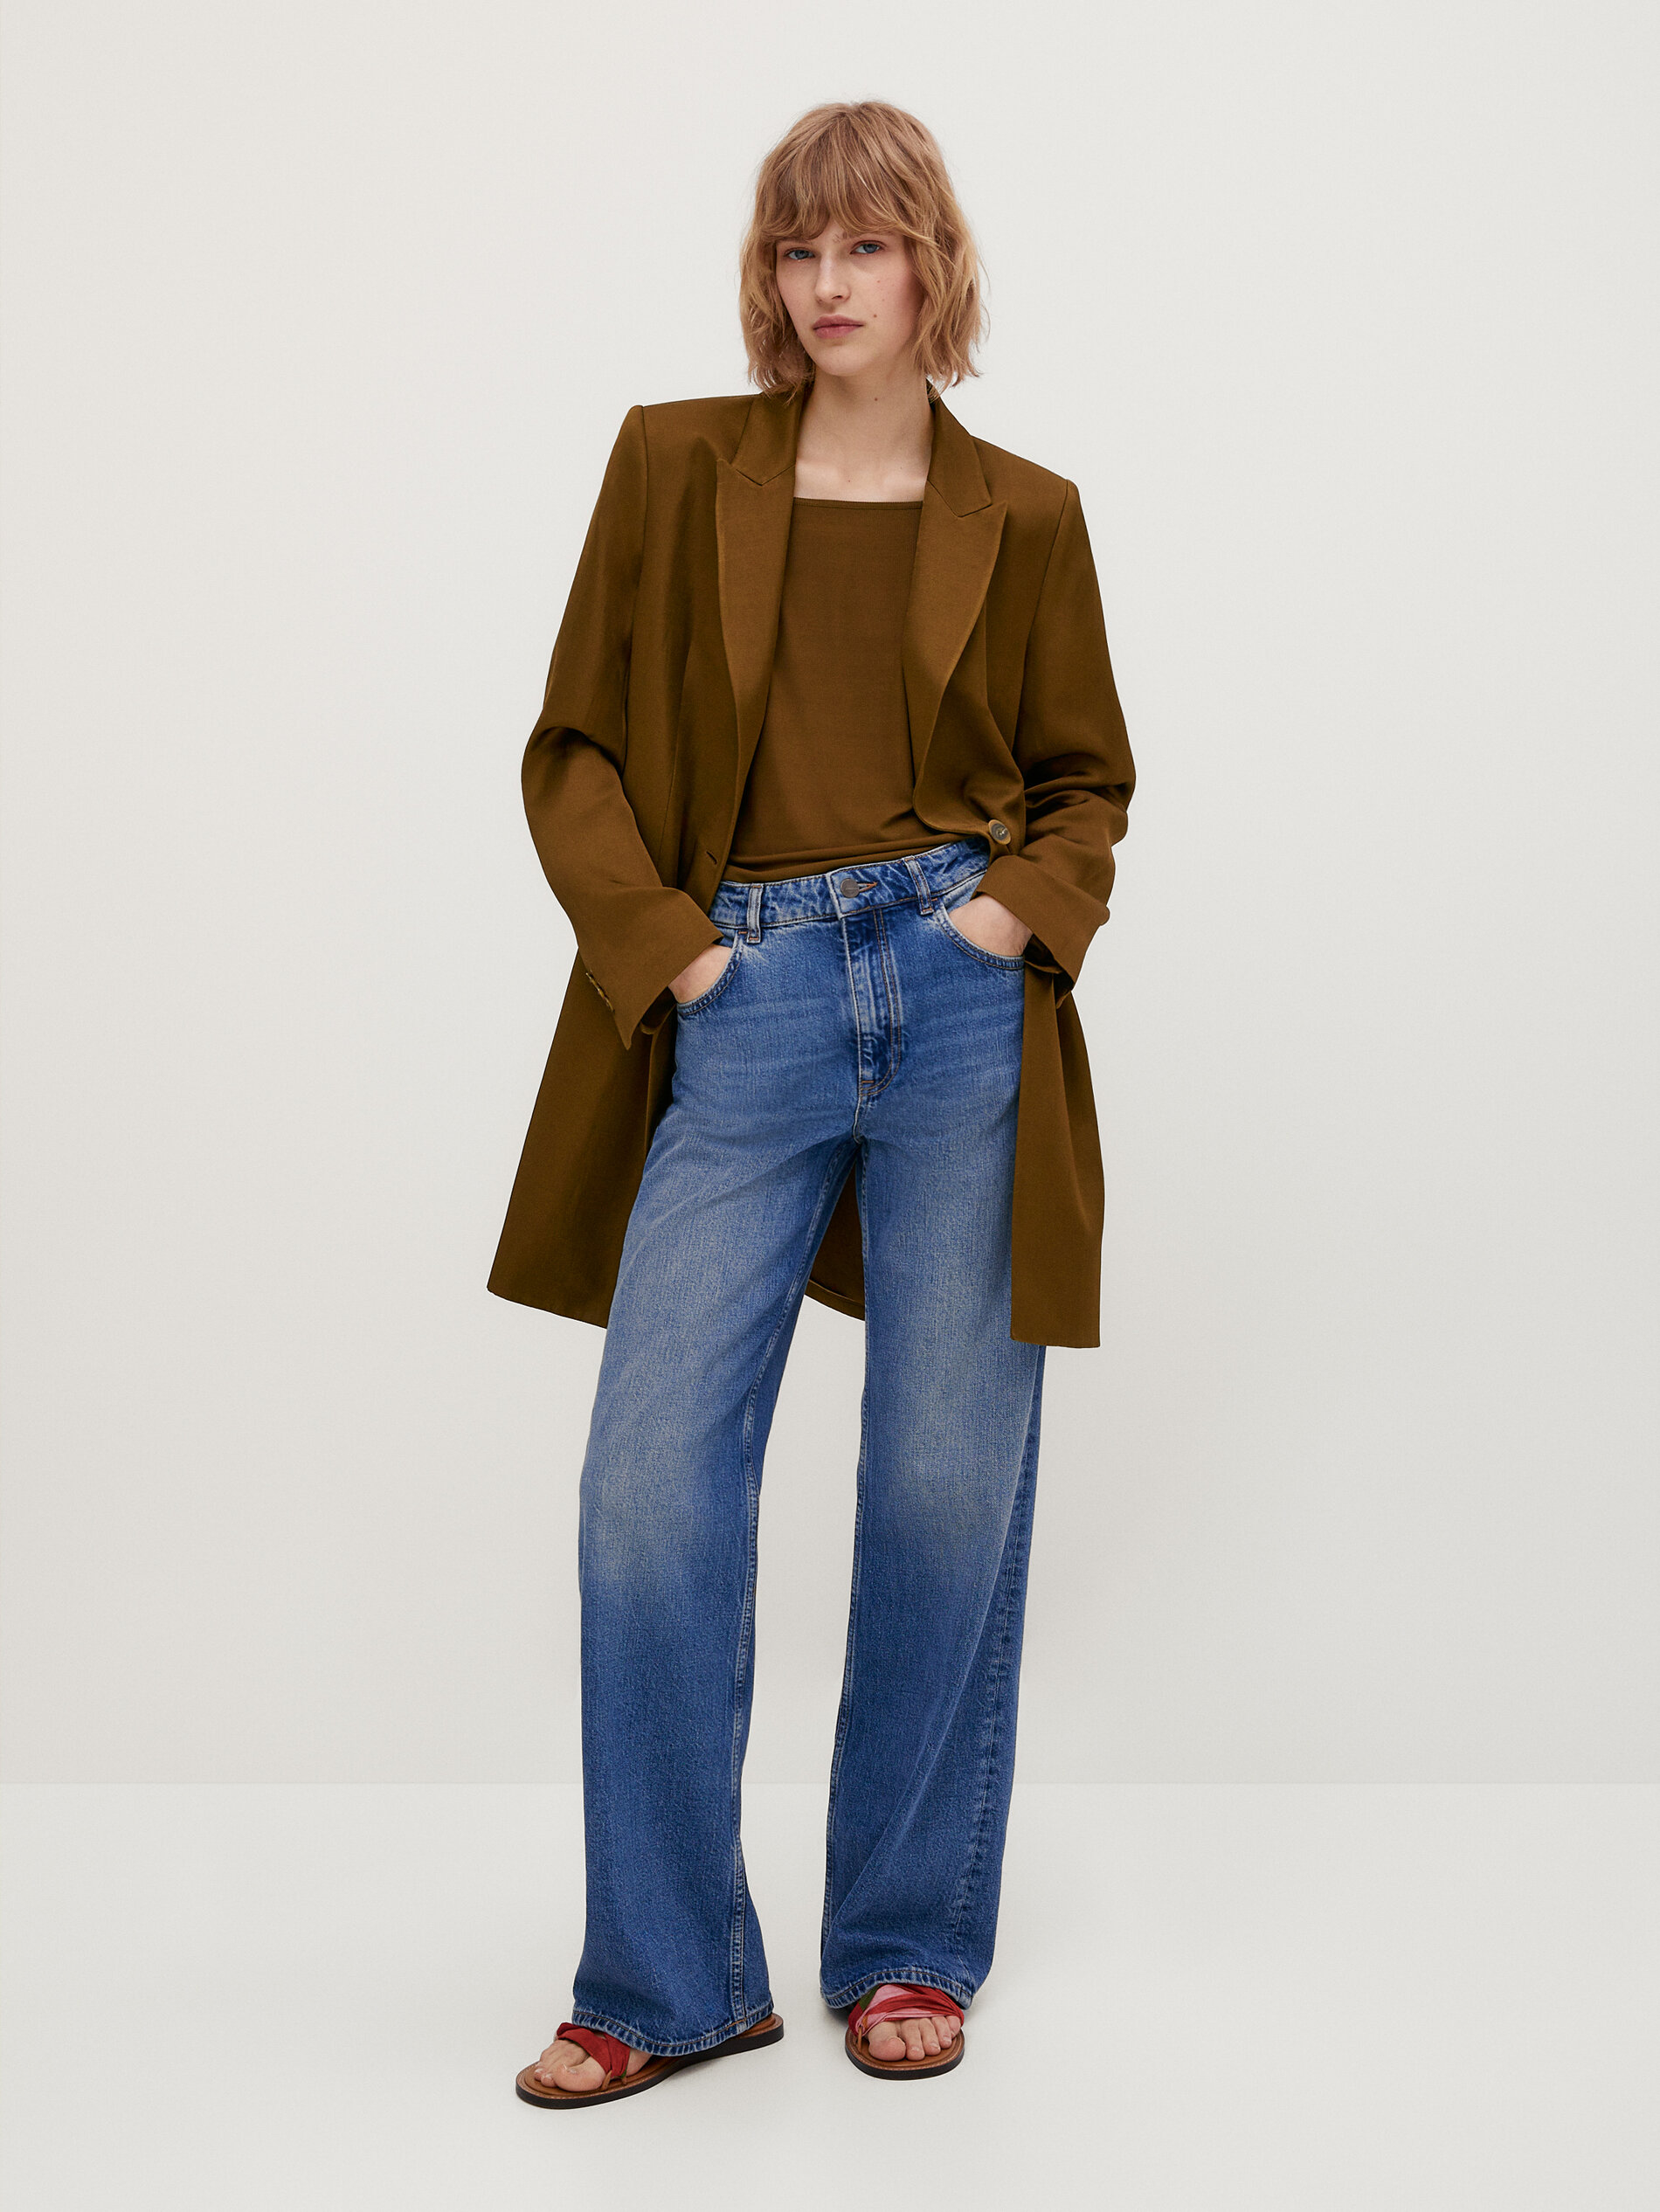 Relaxed fit high-waist jeans - Massimo Dutti United States of America